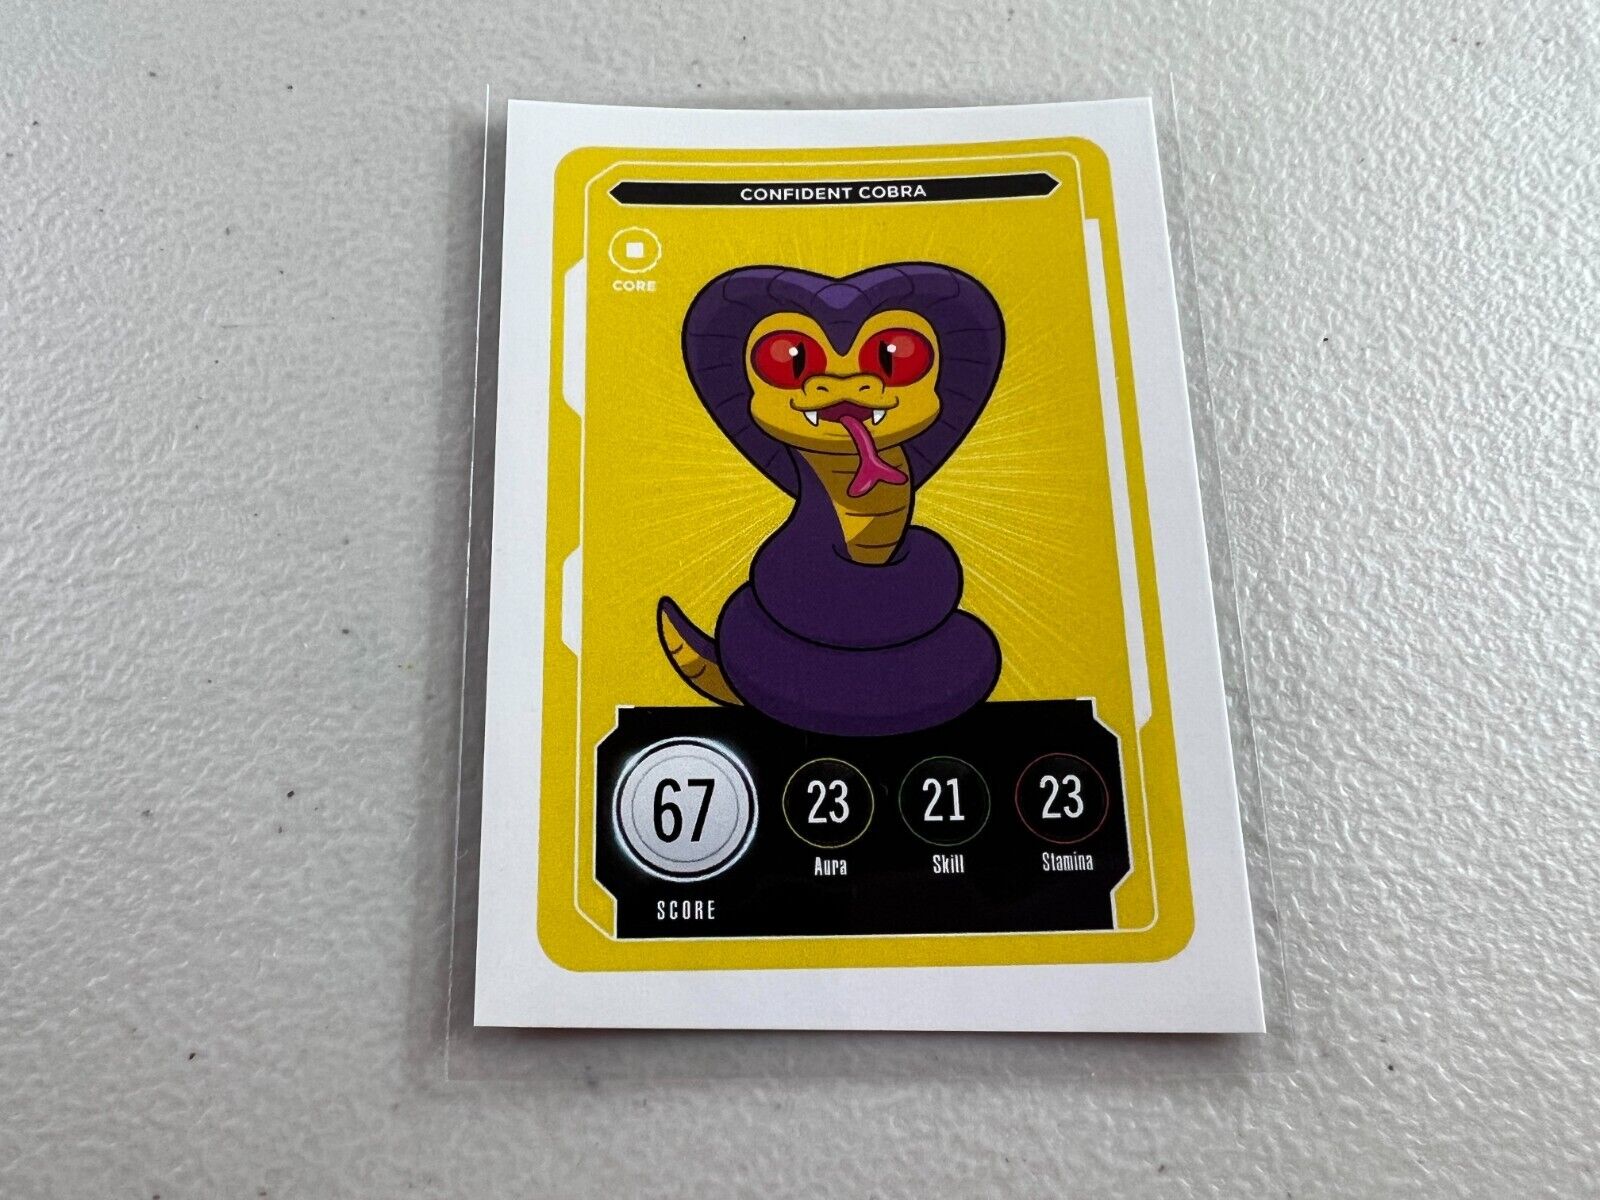 Confident Cobra VeeFriends Series 2 Compete and Collect Core Card Gary Vee